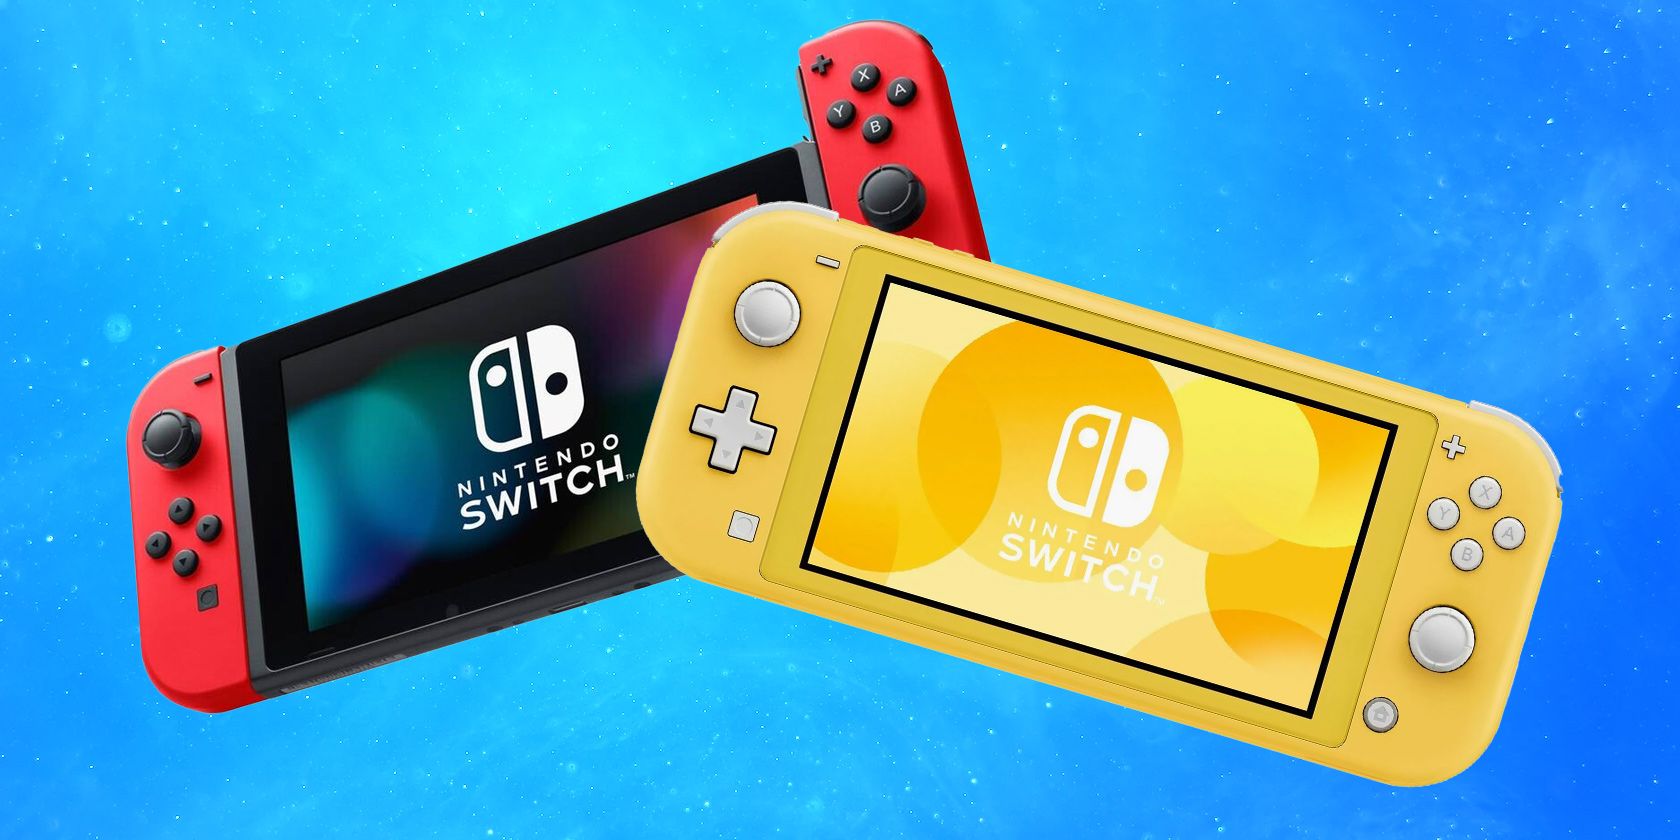 Nintendo Switch and Nintendo Switch lite on blue background 